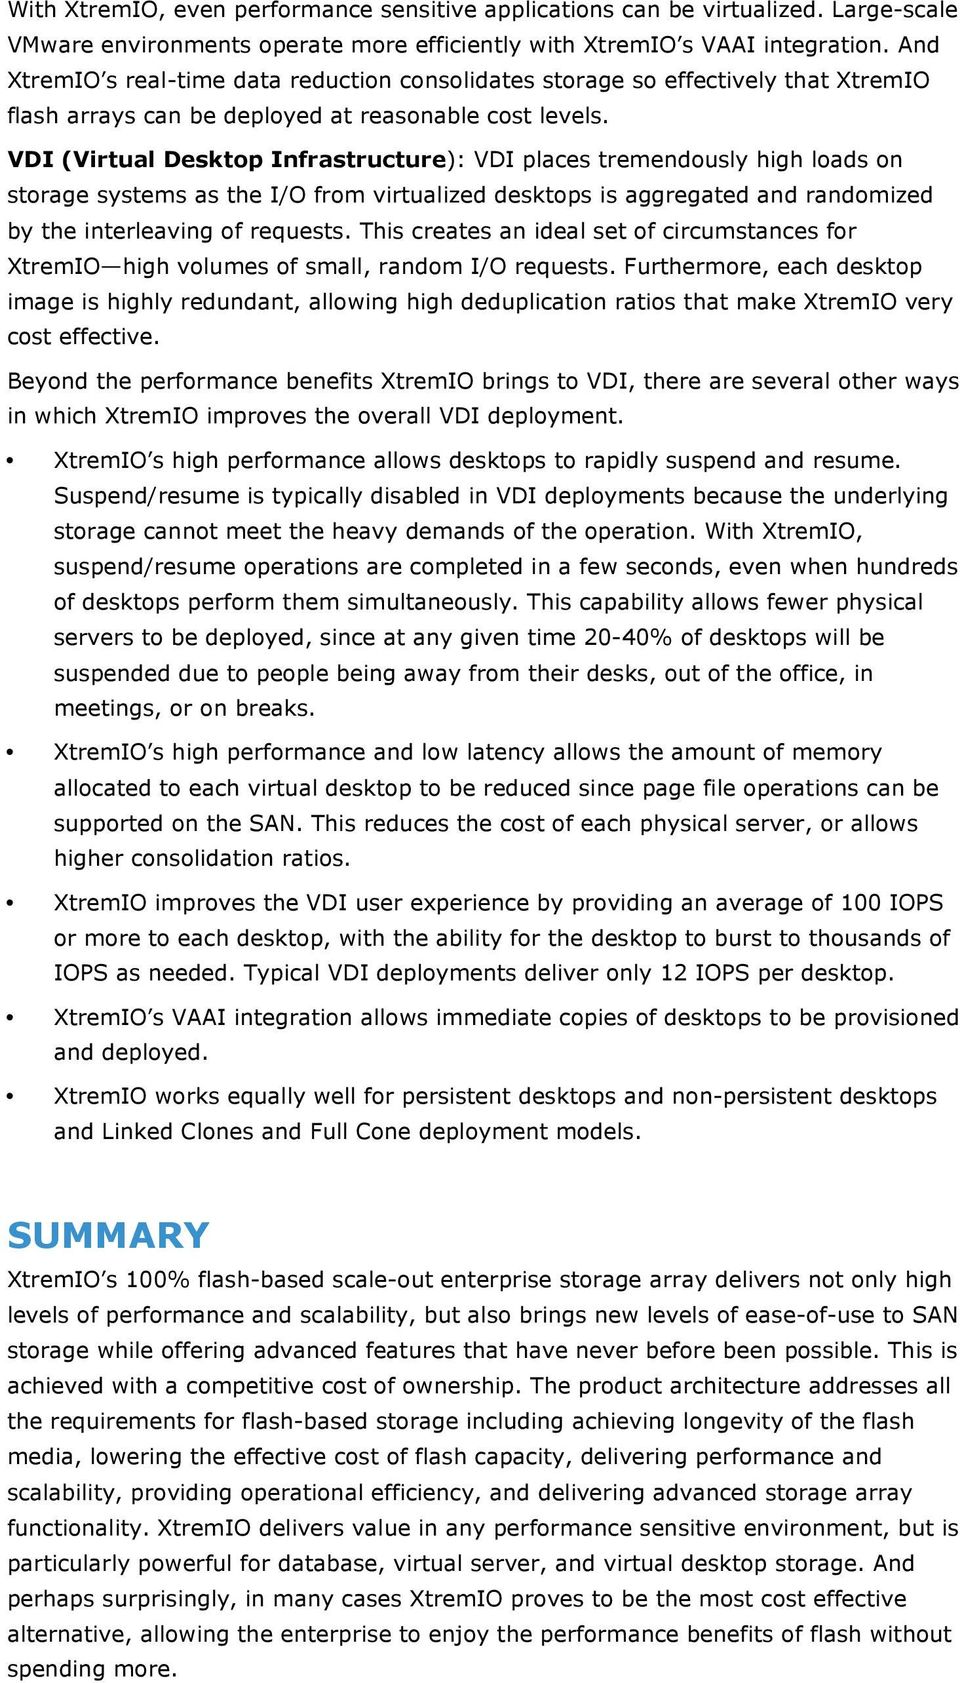 VDI (Virtual Desktop Infrastructure): VDI places tremendously high loads on storage systems as the I/O from virtualized desktops is aggregated and randomized by the interleaving of requests.